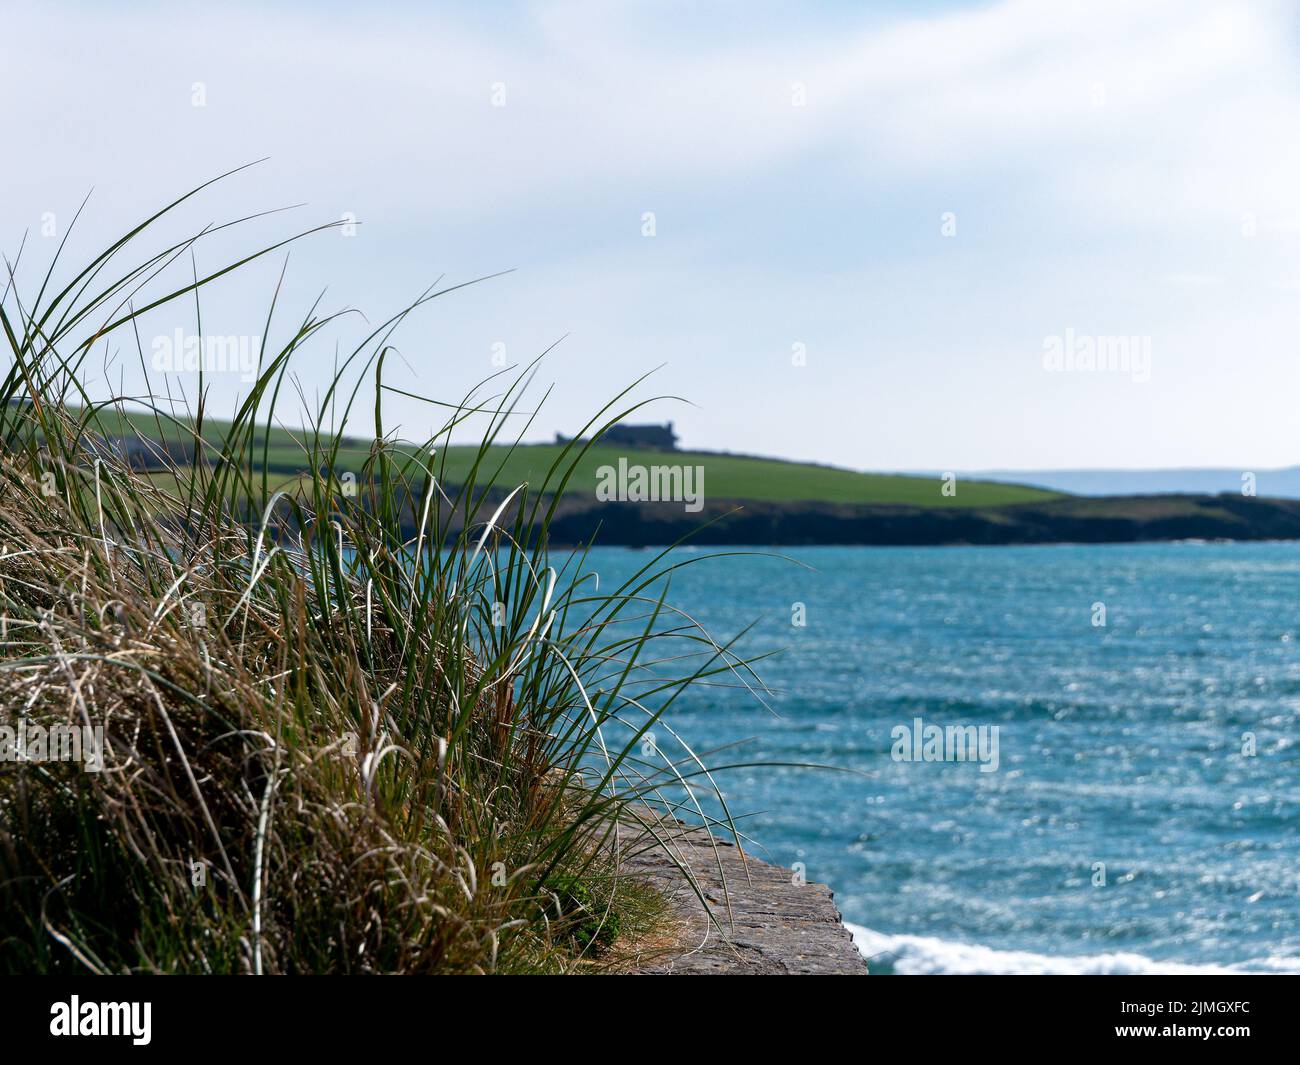 A bush of grass on the shore of the turquoise Celtic Sea. Seaside landscape. Green grass near body of water Stock Photo